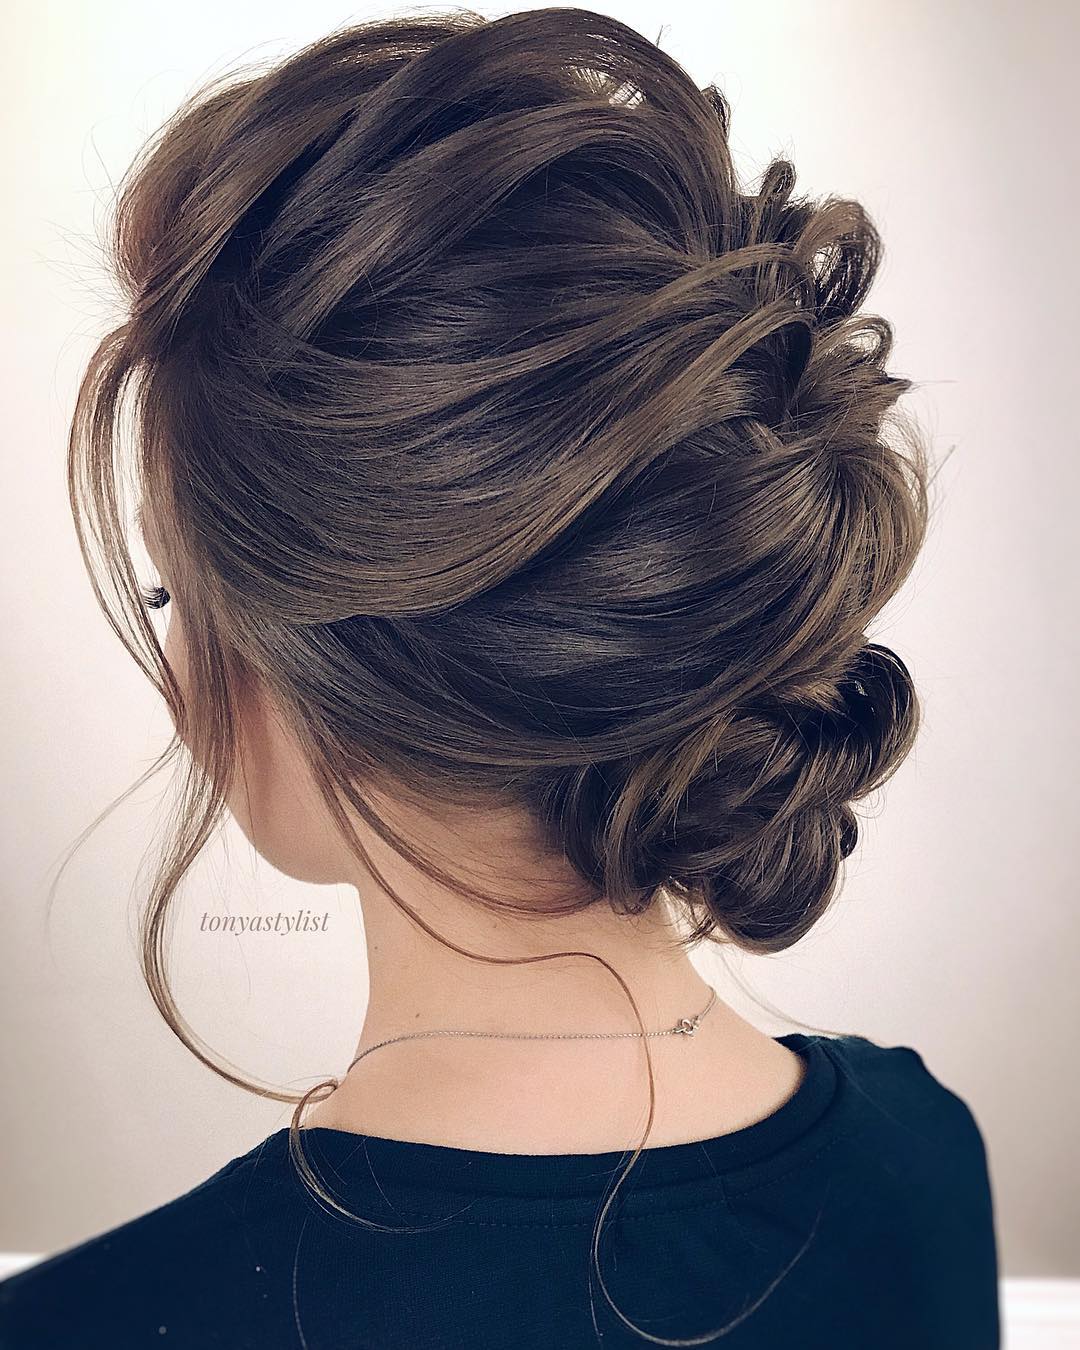 10 Updos For Medium Length Hair Prom Homecoming Hairstyle Ideas 2021